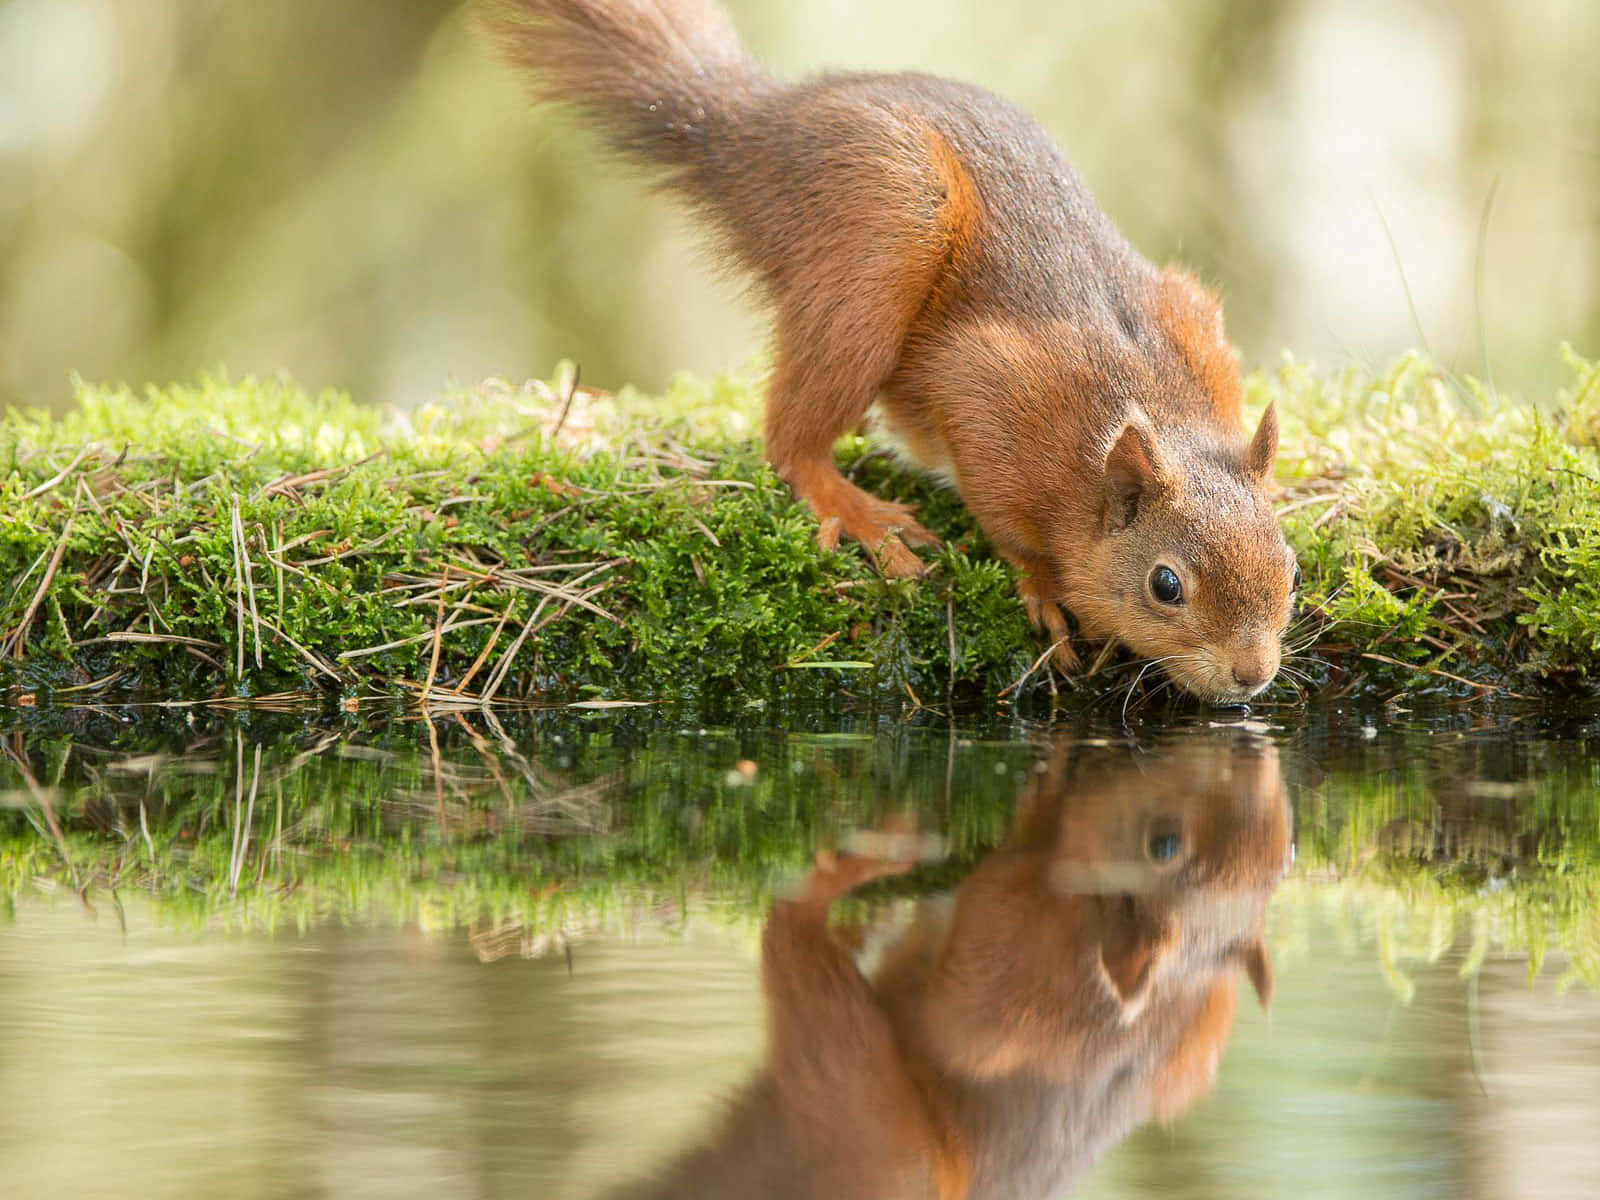 A curious red squirrel exploring its environment